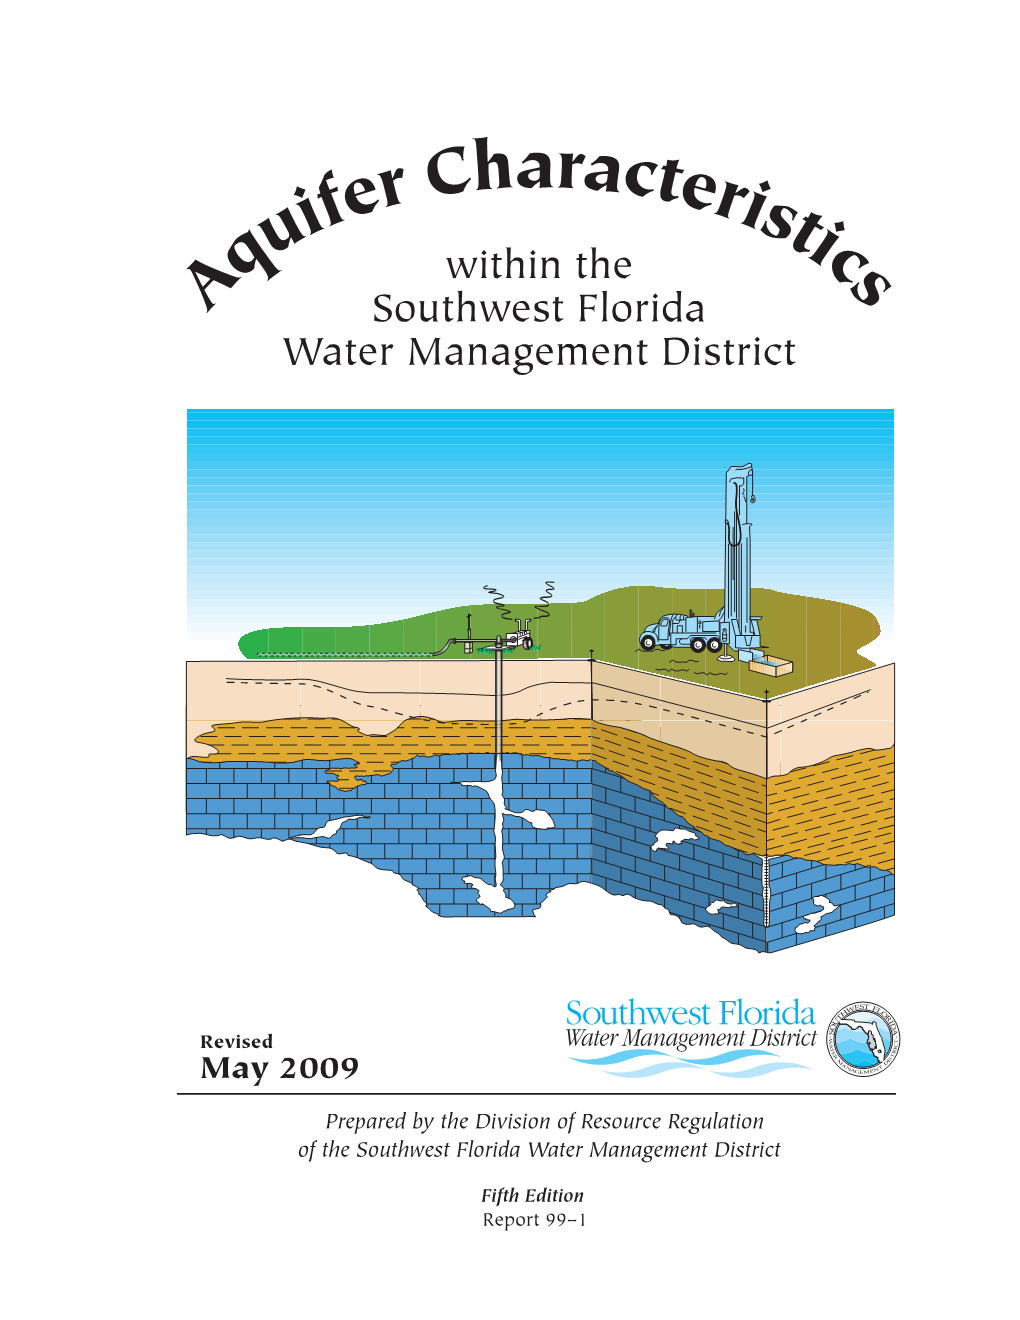 R Characteri Uif Sti Q Within the Cs a Southwest Florida Water Management District